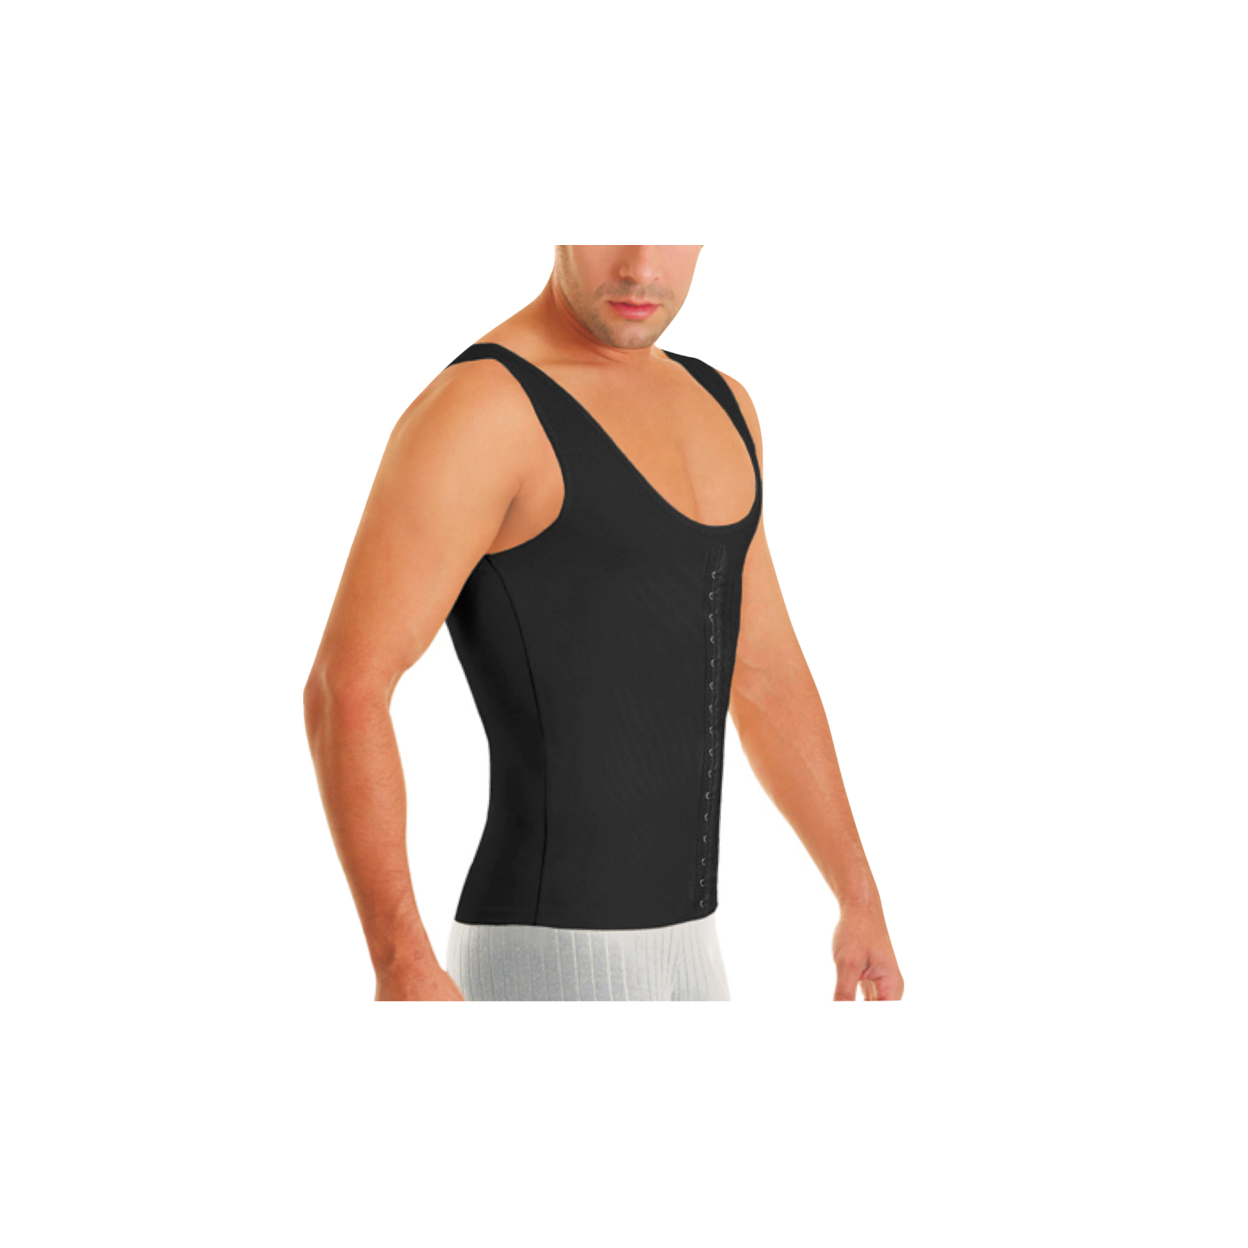 Men Waistcoat High-Compression Body Shaper In Regular And Plus Sizes - Black, Large